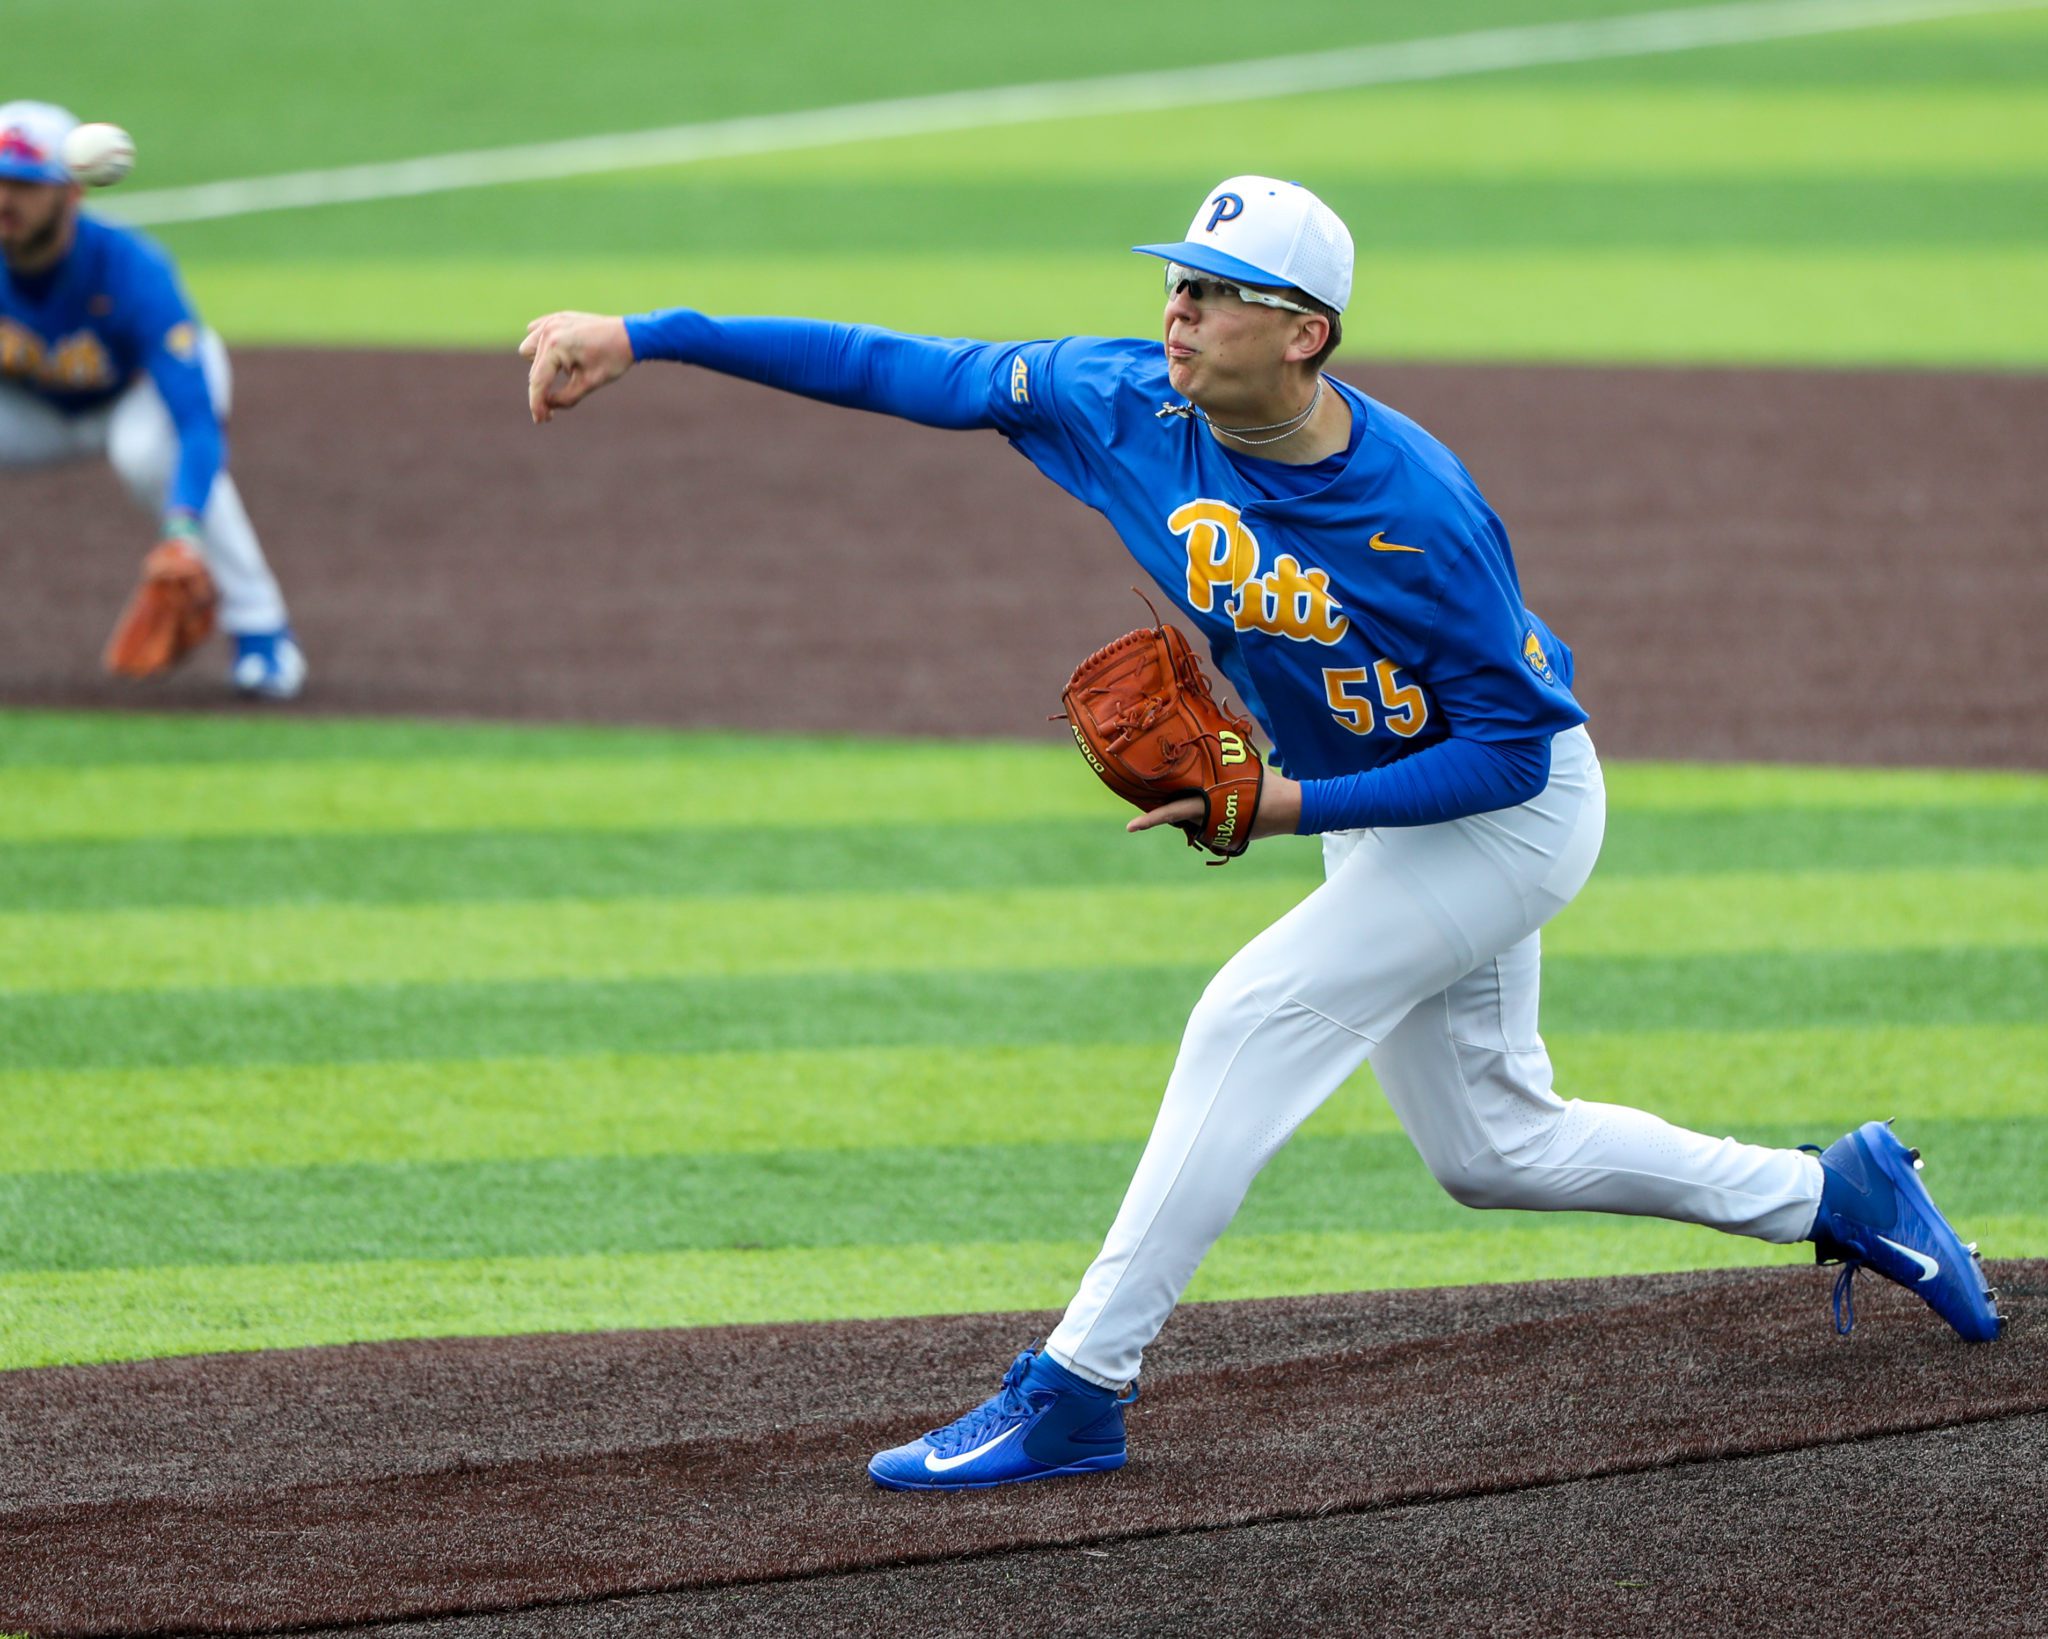 Seattle Mariners Take Pitt Pitcher Logan Evans in the 12th Round of the MLB Draft